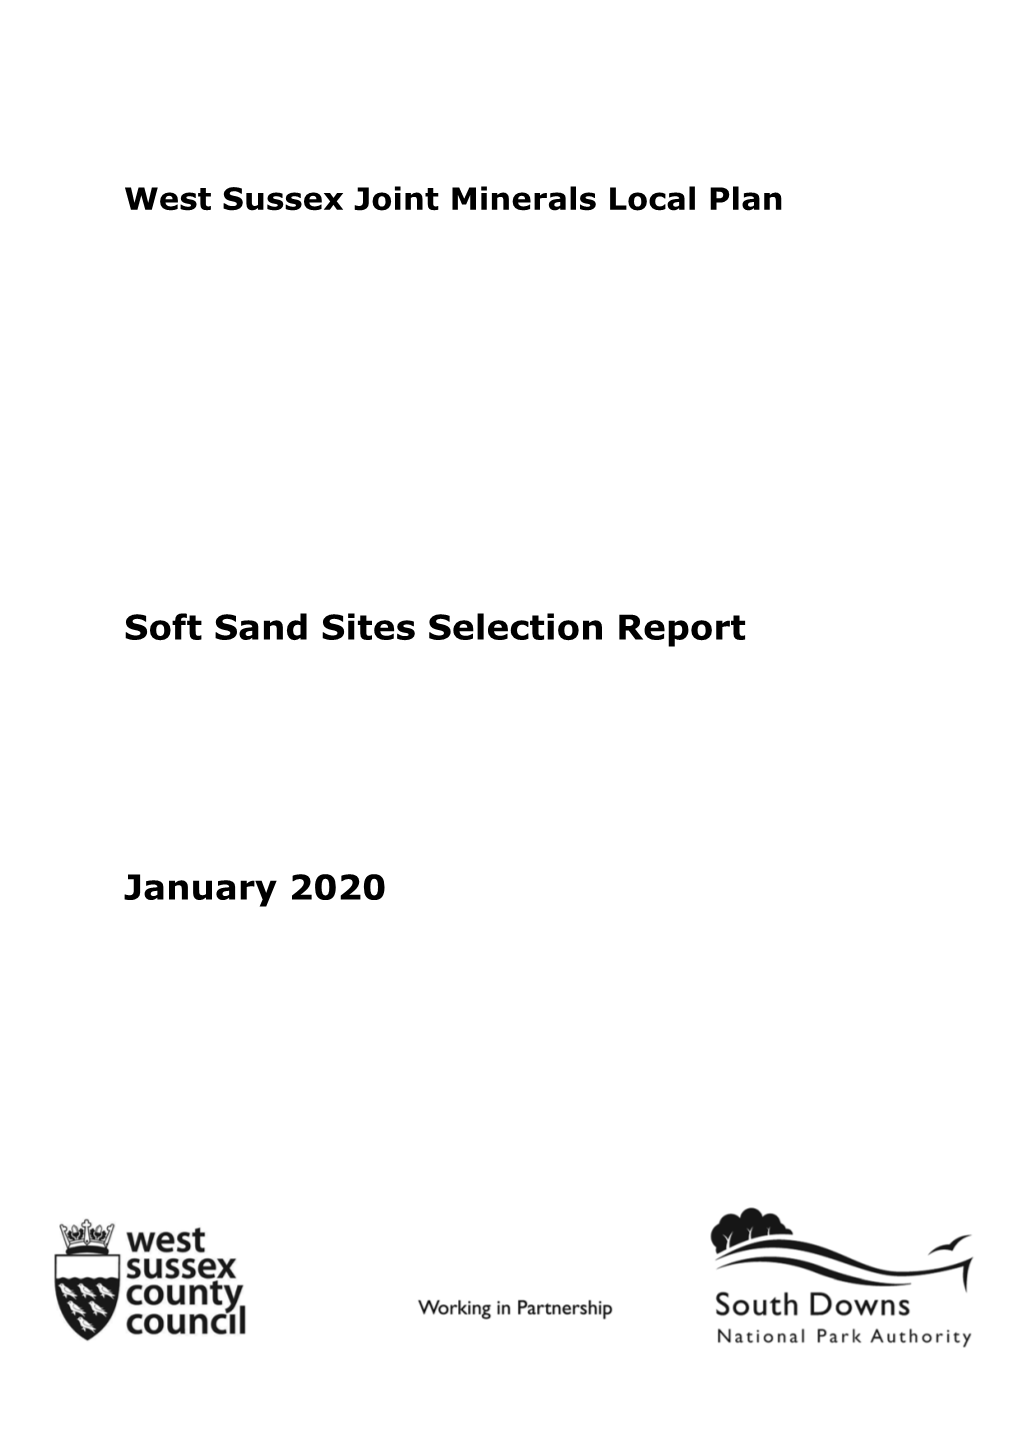 Soft Sand Sites Selection Report January 2020